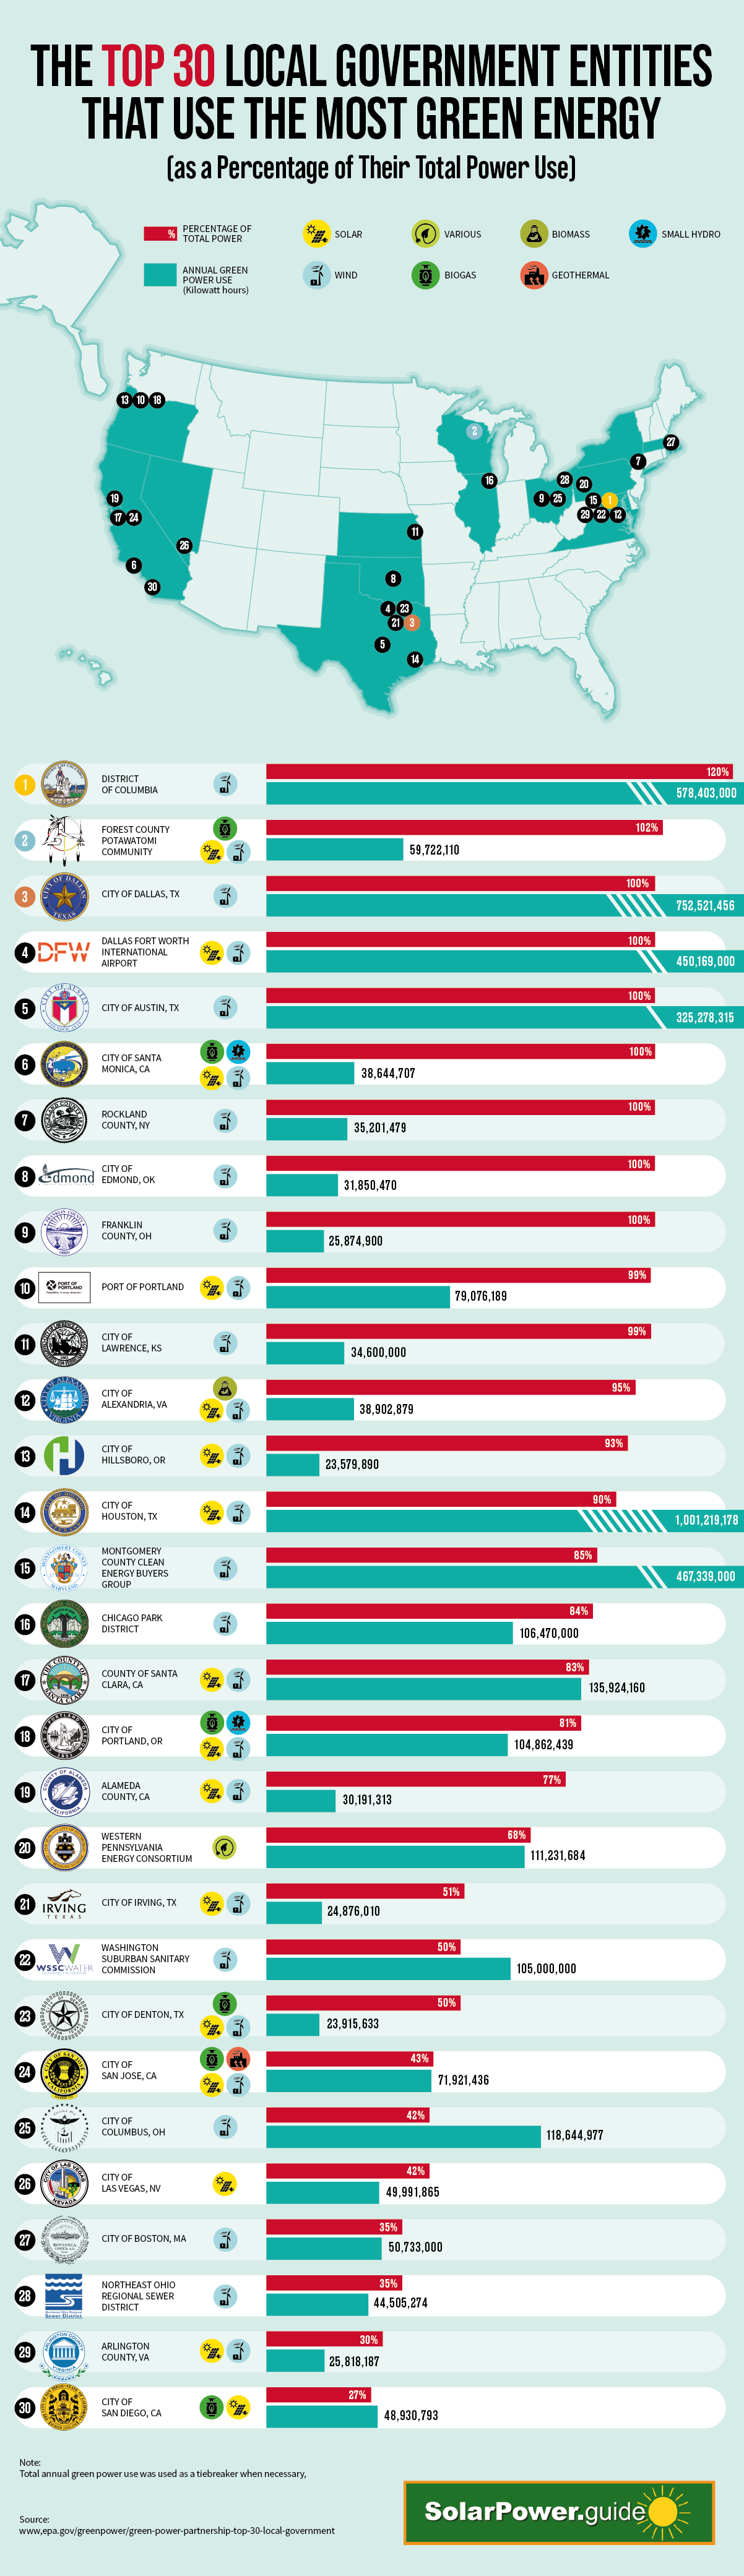 The Top 30 Local Government Entities That Use the Most Green Energy - Solar Power Guide - Infographic